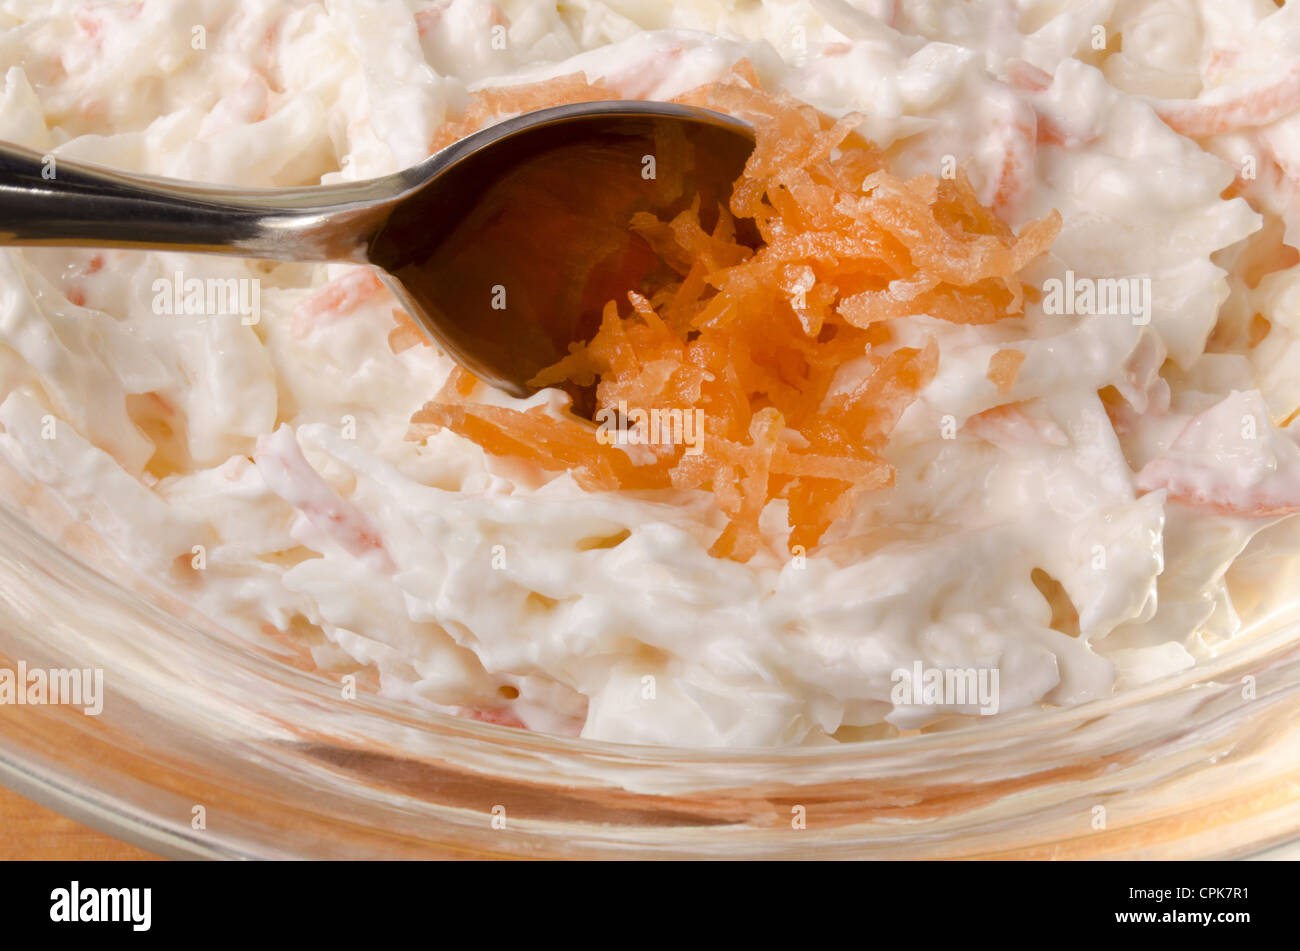 put some grated carrot on to an irish coleslaw salad Stock Photo